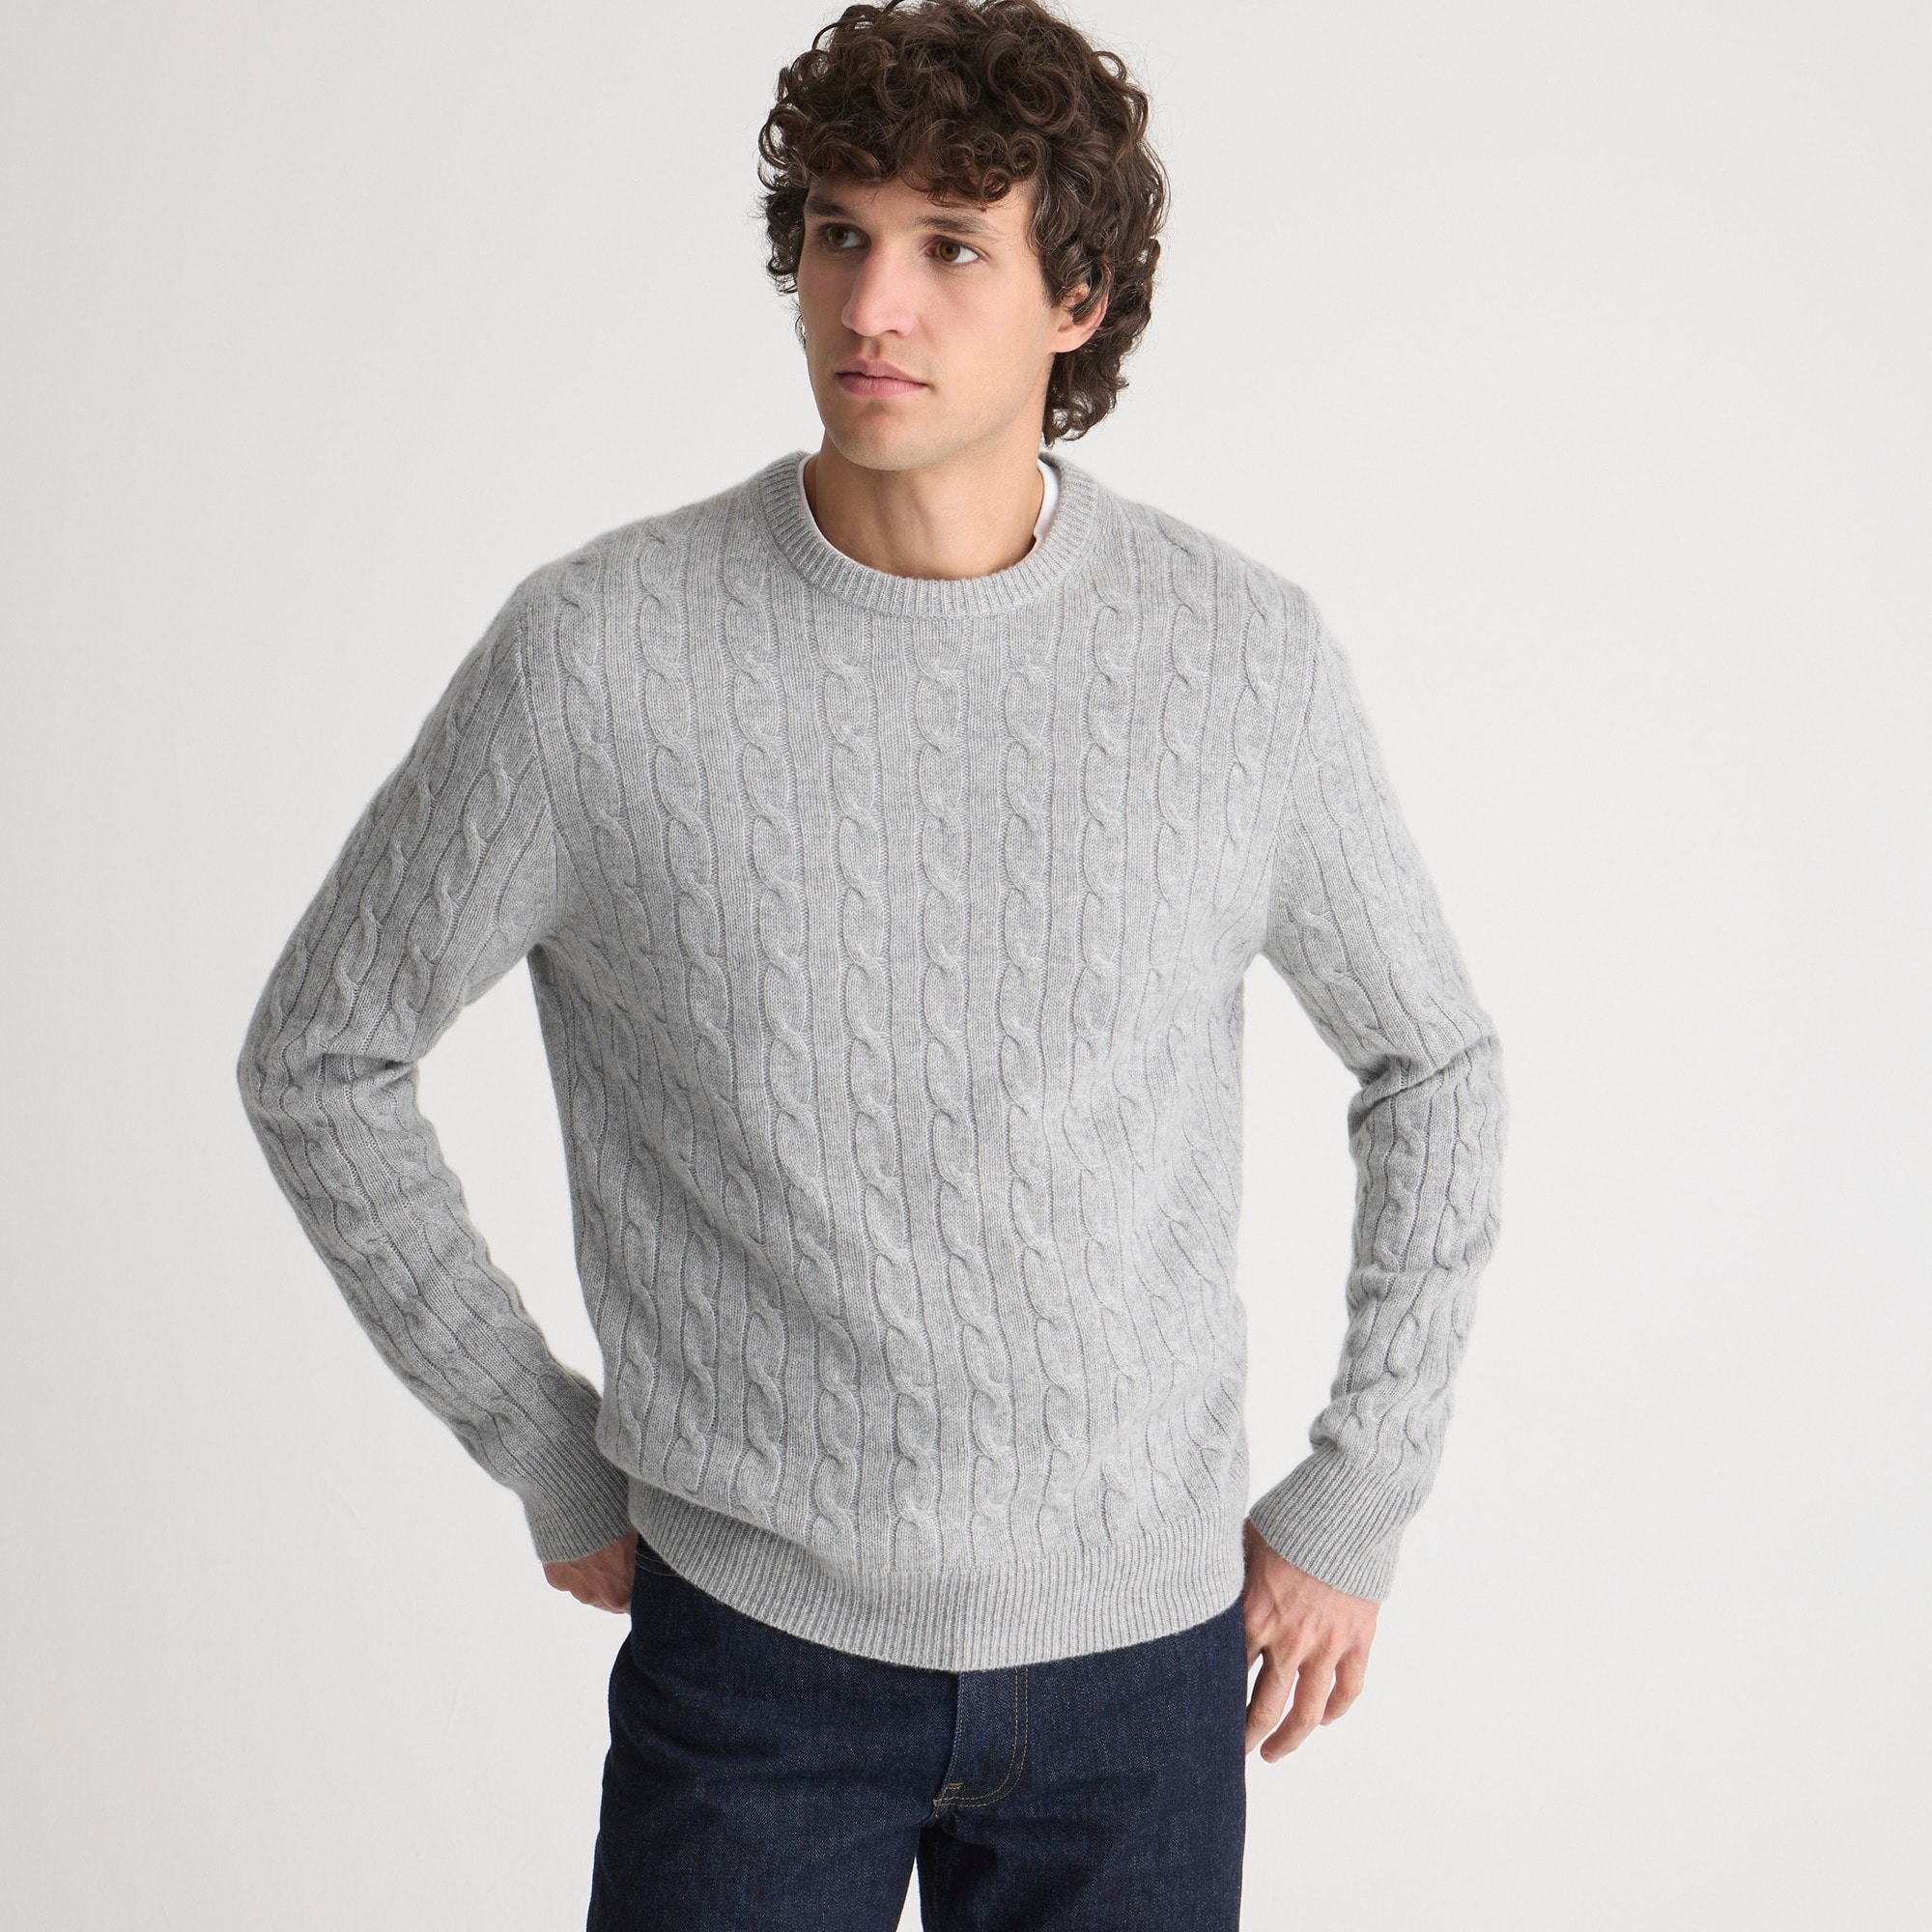 Jcrew Cashmere cable-knit sweater